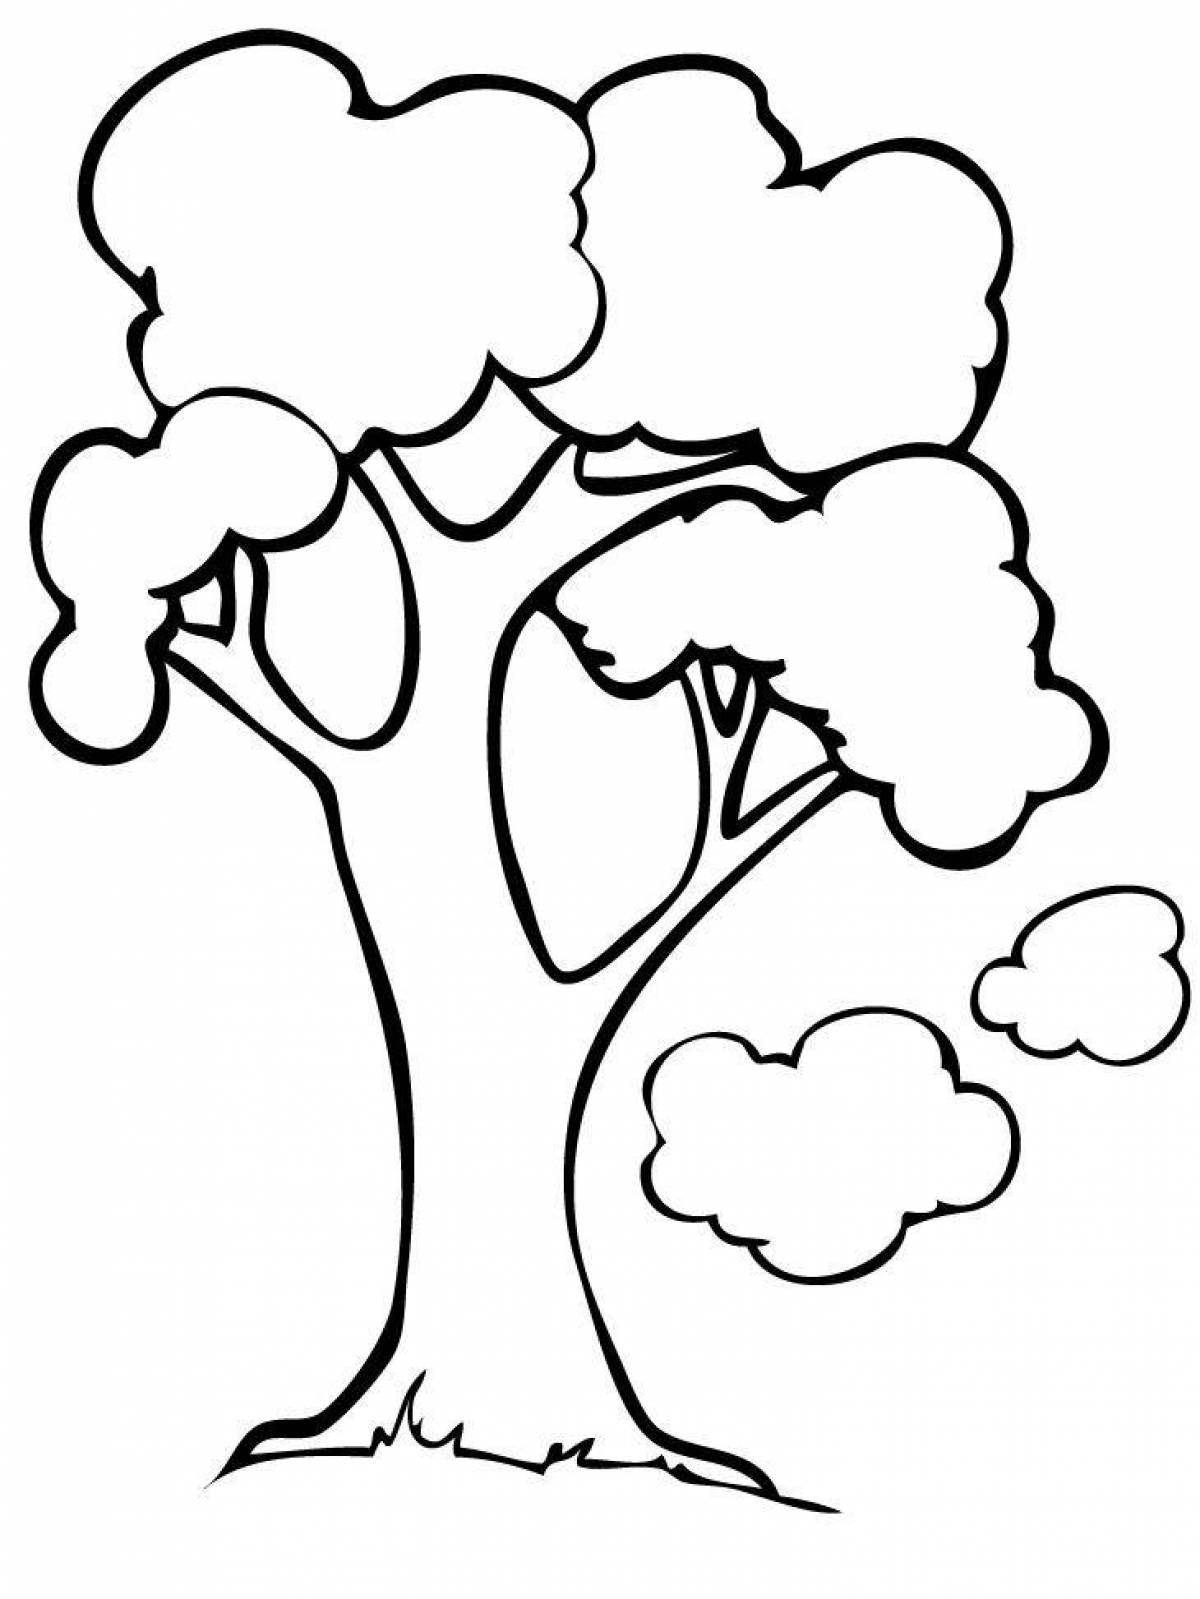 Playful tree coloring page for kids